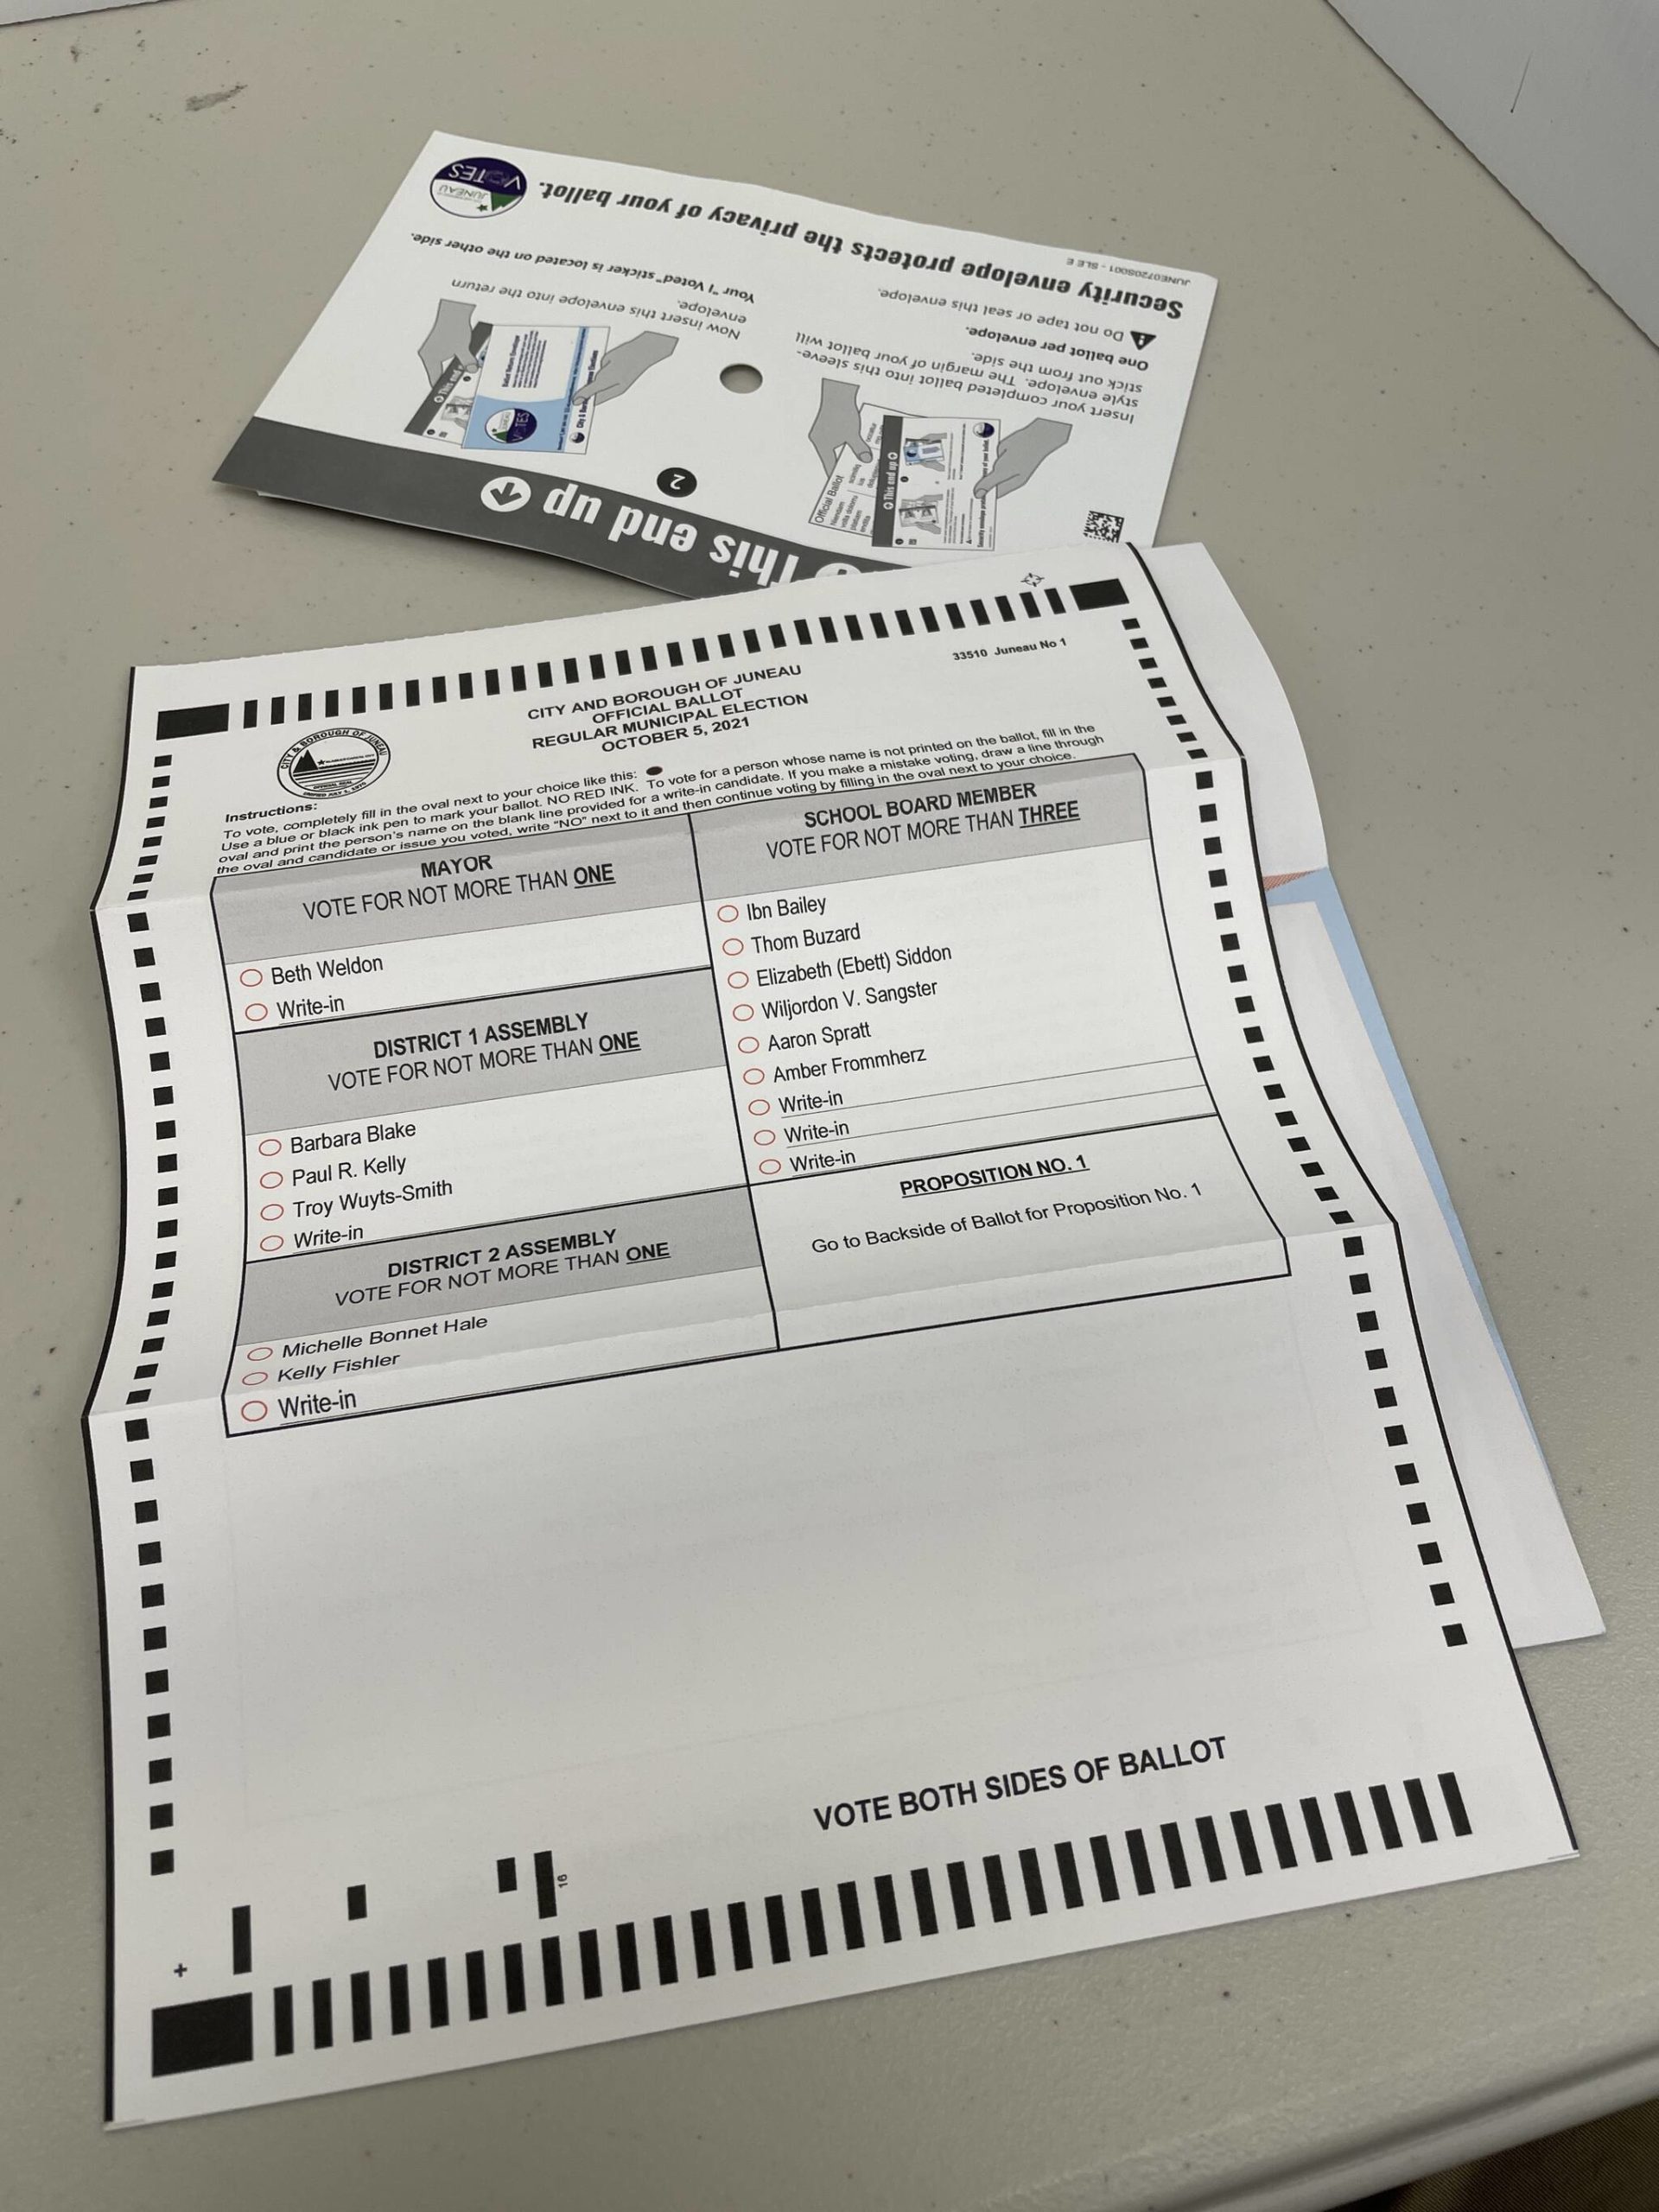 Michael S. Lockett / Juneau Empire 
Tuesday, Oct. 5, 2021 was the last day to vote in Juneau’s municipal elections.